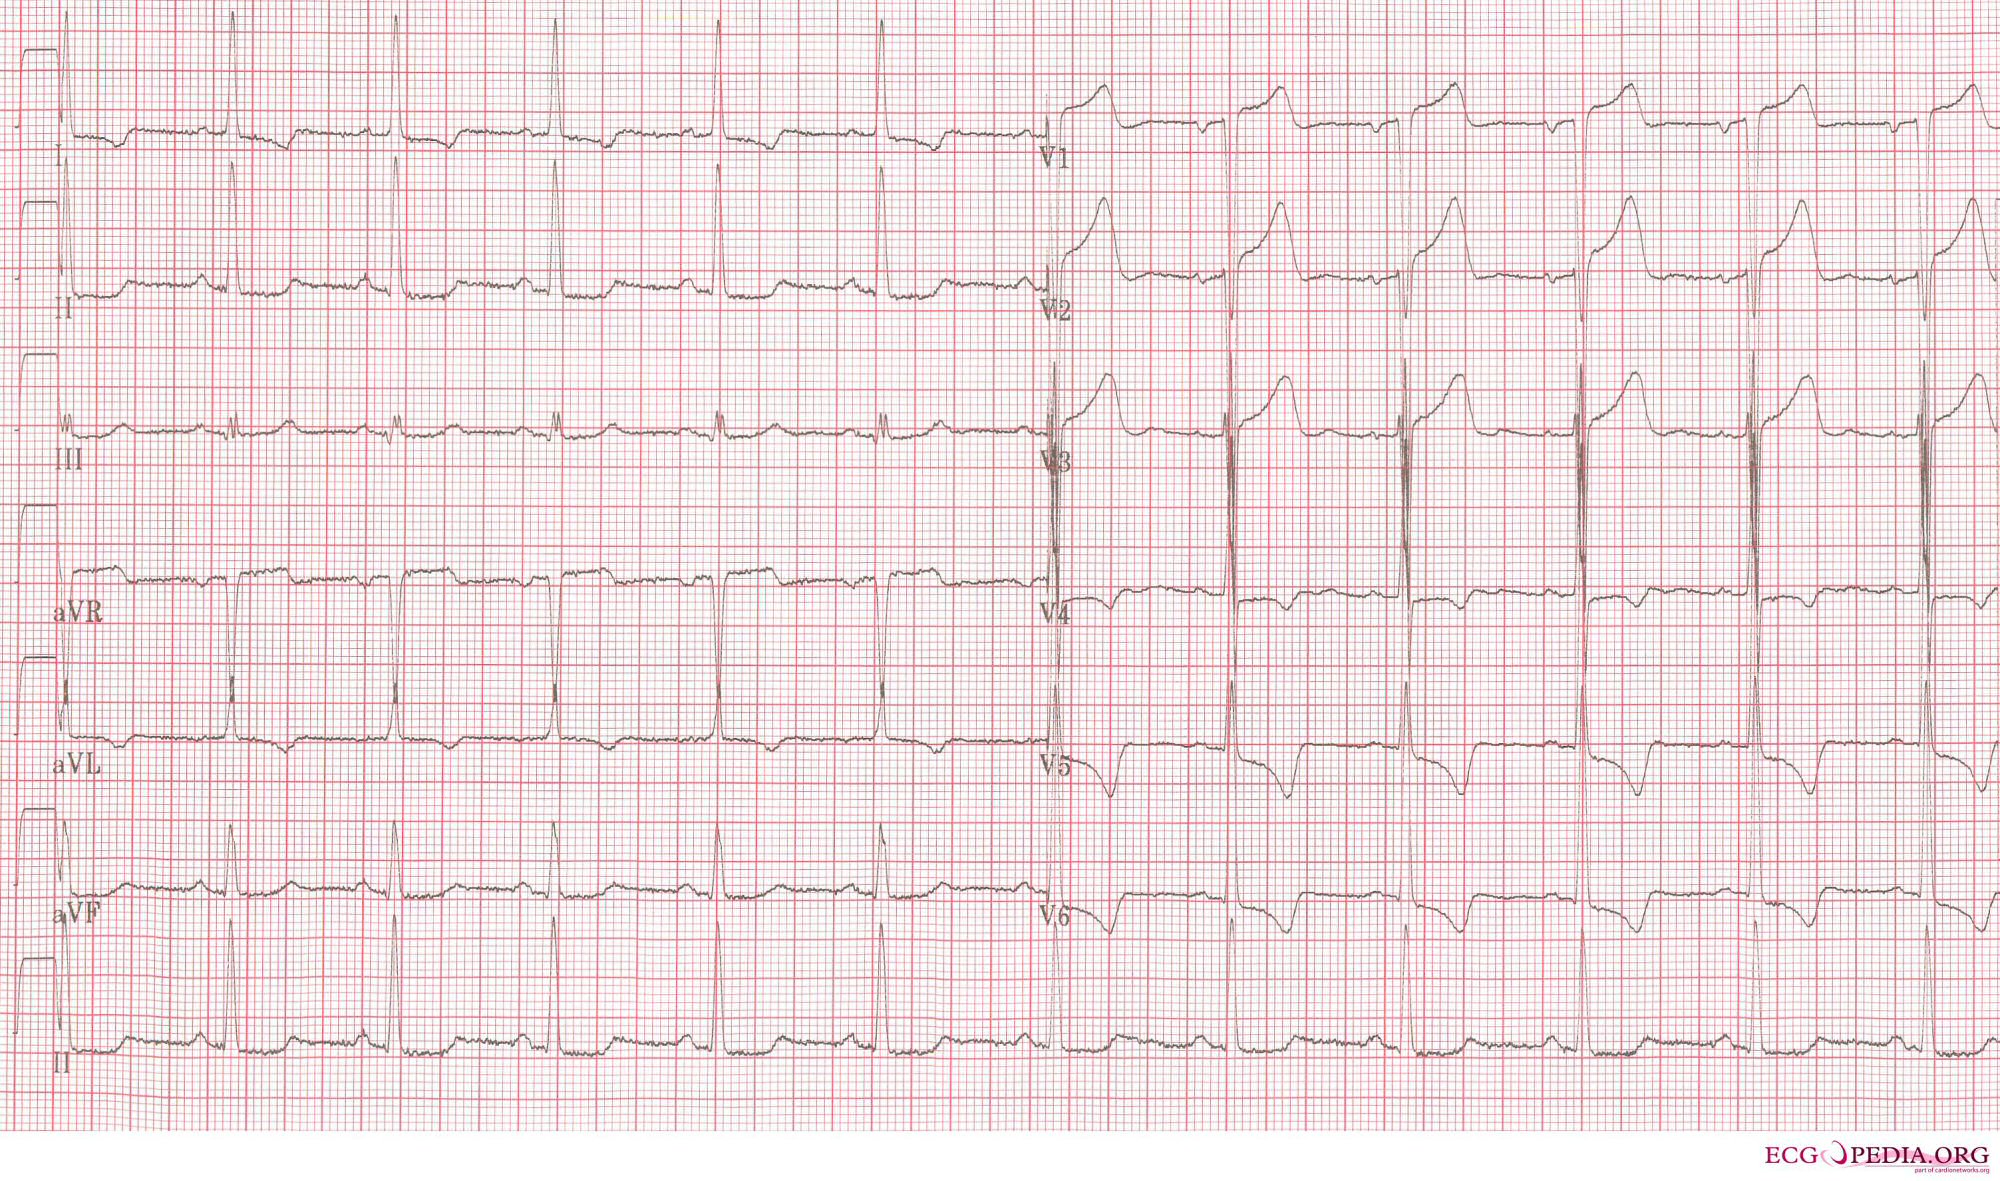 EKG of a patient with LVH and subendocardial ischemia leading to positive cardiovascular markers in blood testing.